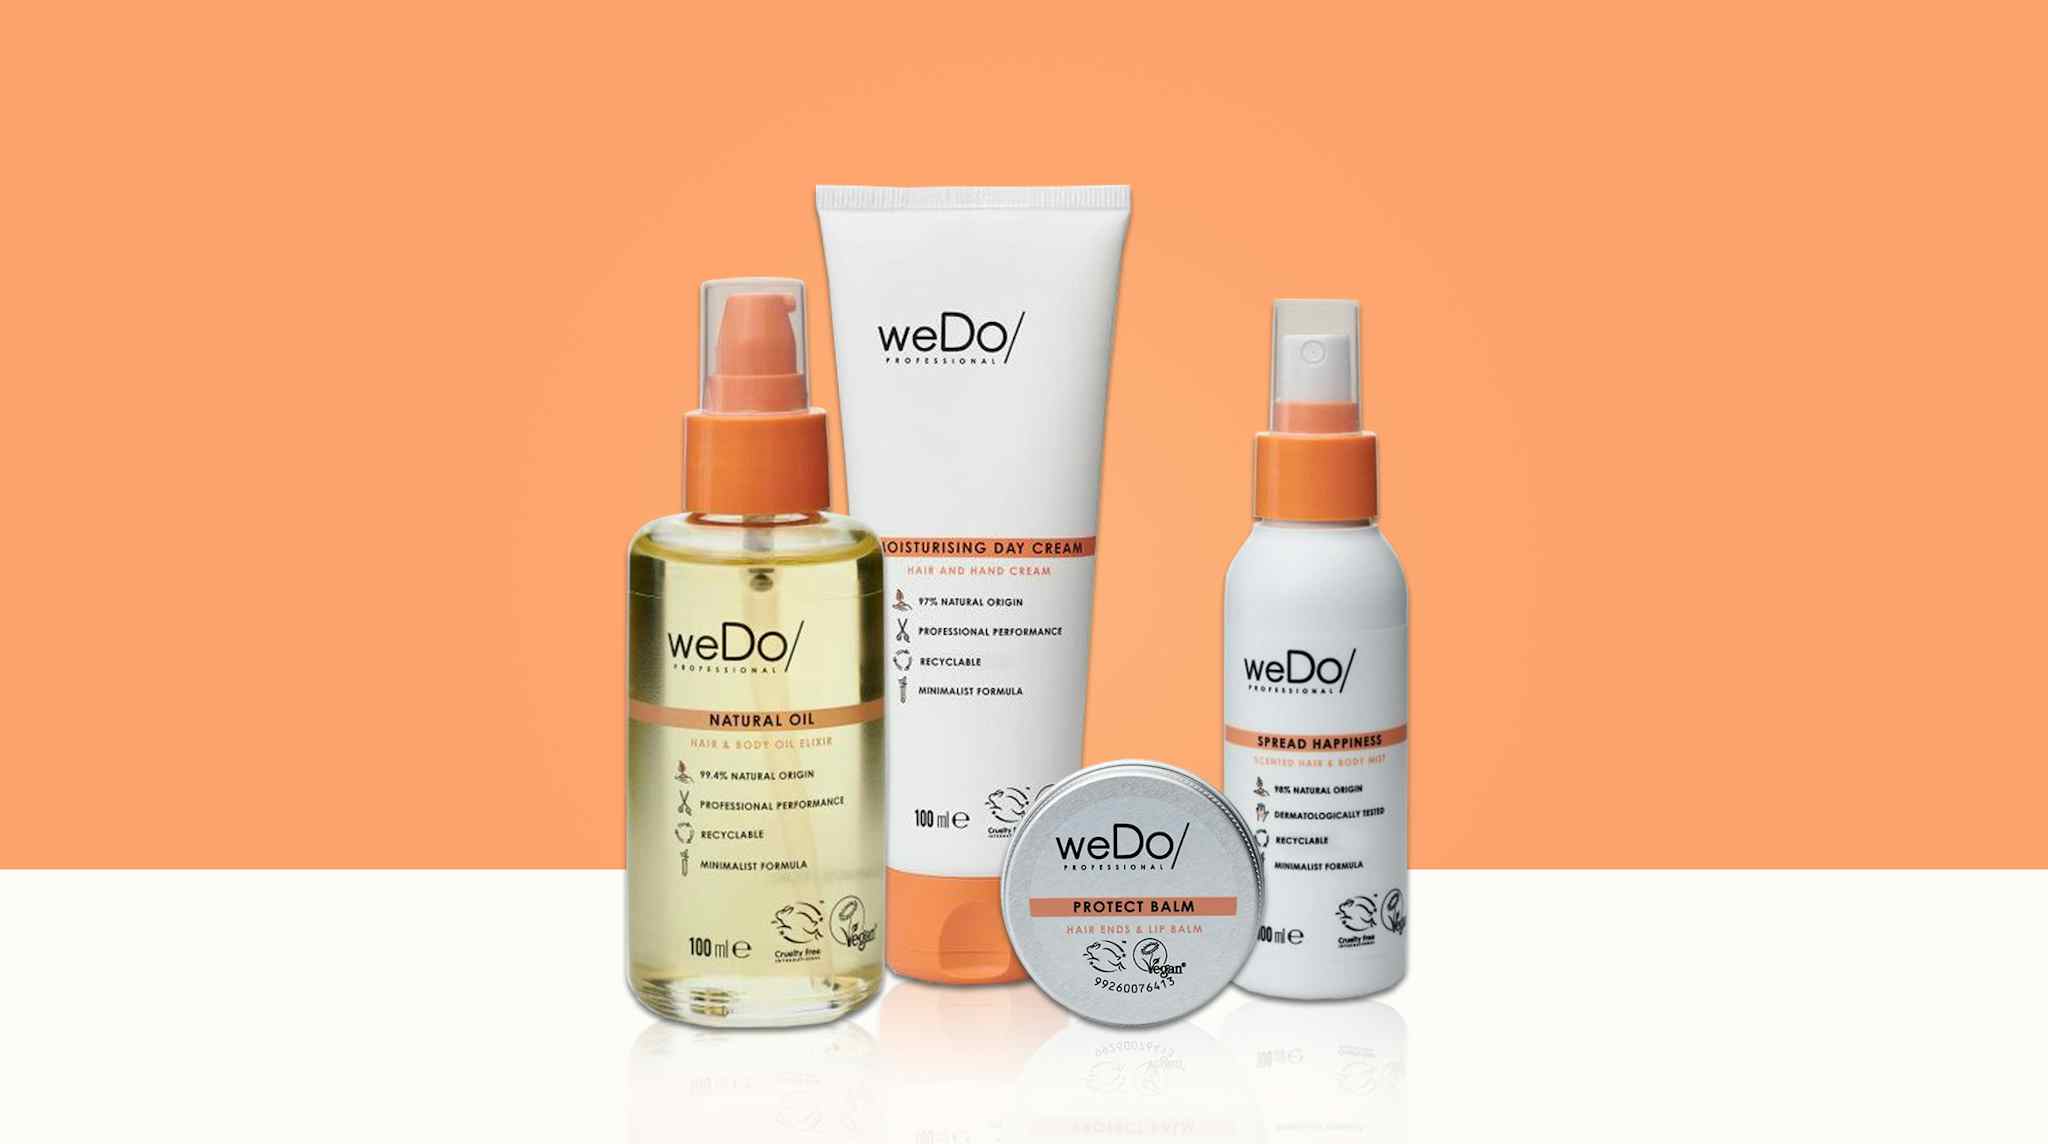 weDo Hair&Body care line range of recyclable, vegan hair products